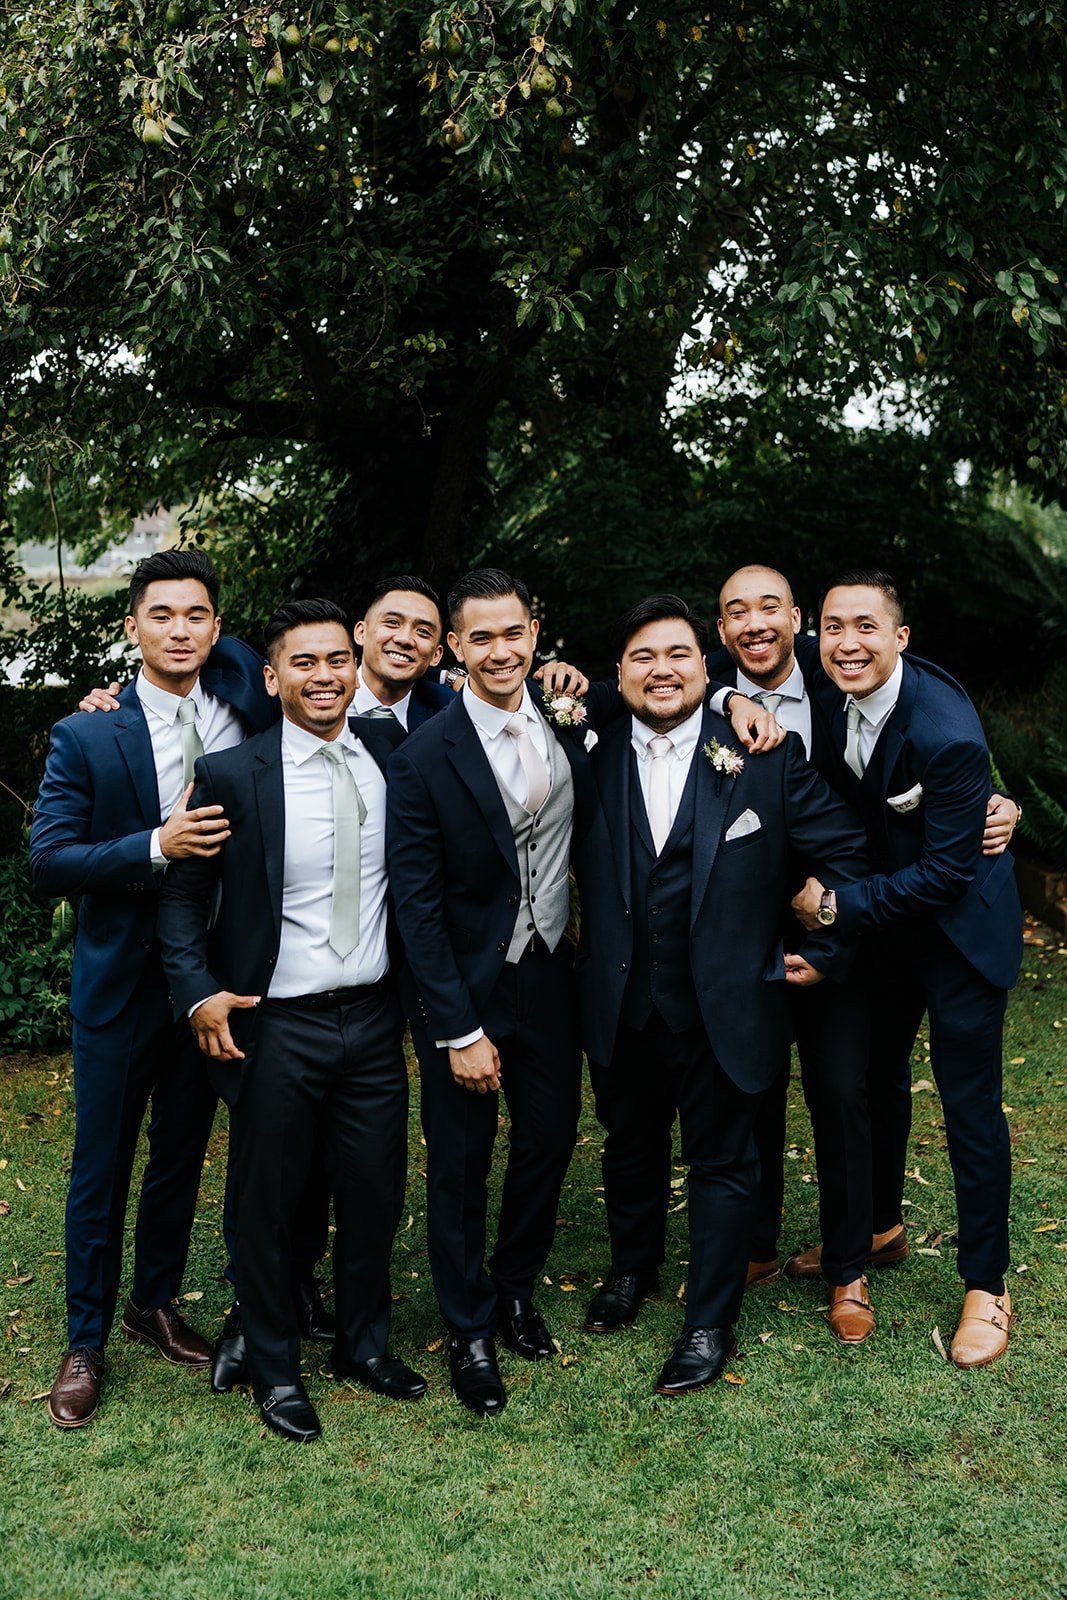 Staged group shot of groom and his groomsmen after wedding ceremony